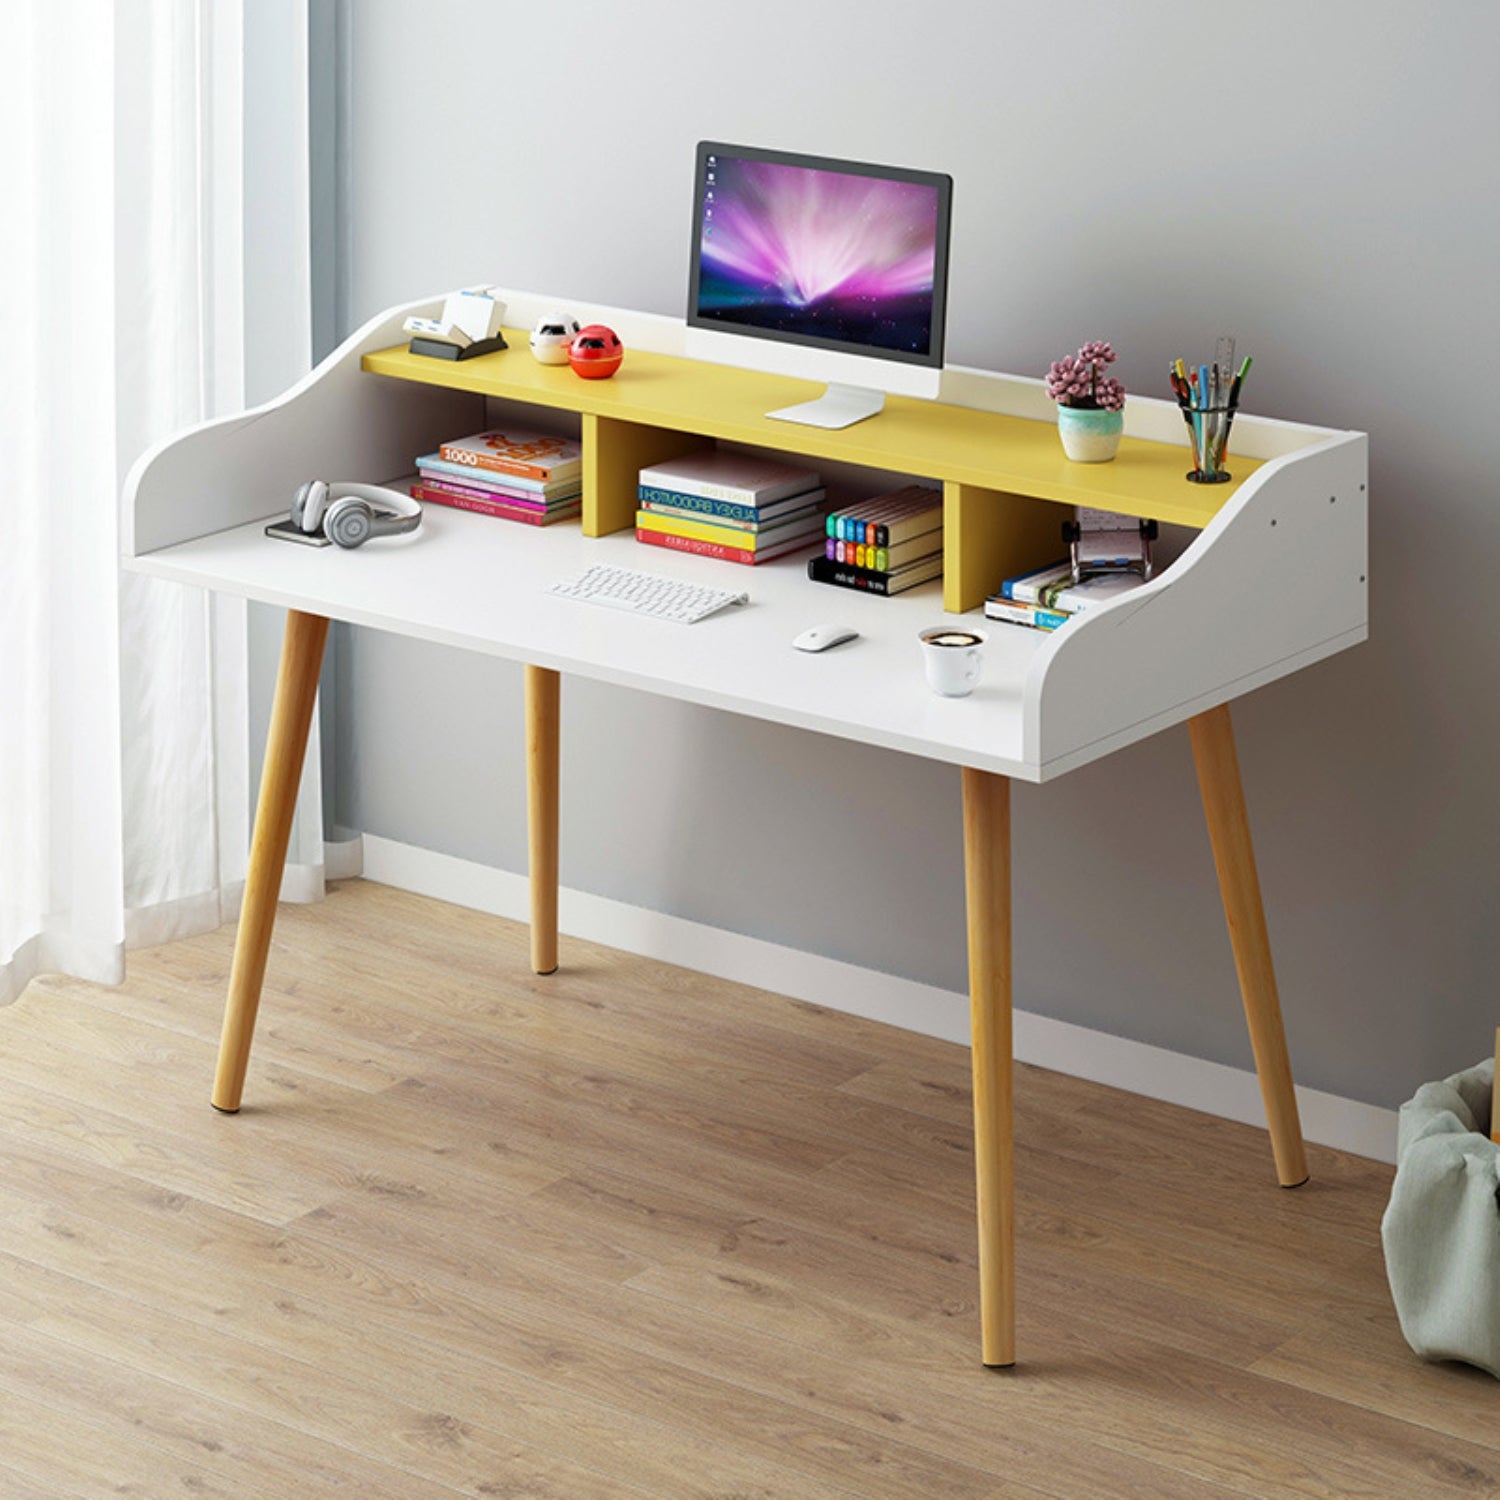 ViscoLogic BOOKER Mid-Century Home Office  Computer Writing Desk, Workstation, Study Desk With Storage Shelves (White)